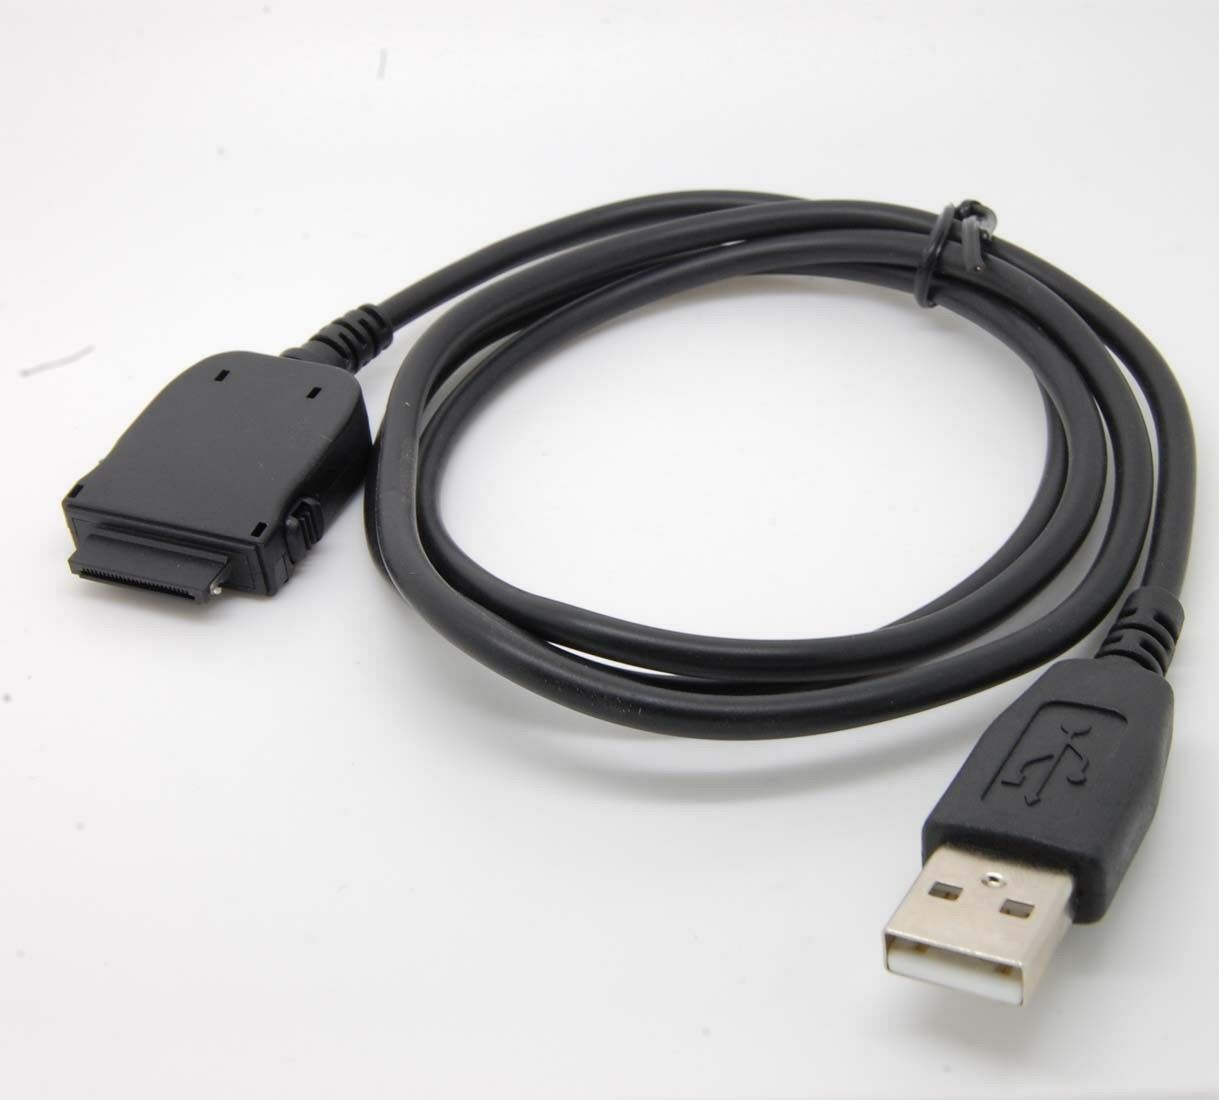 2 In 1 USB Data Sync and Charging CABLE HP COMPAQ IPaq series - Click Image to Close